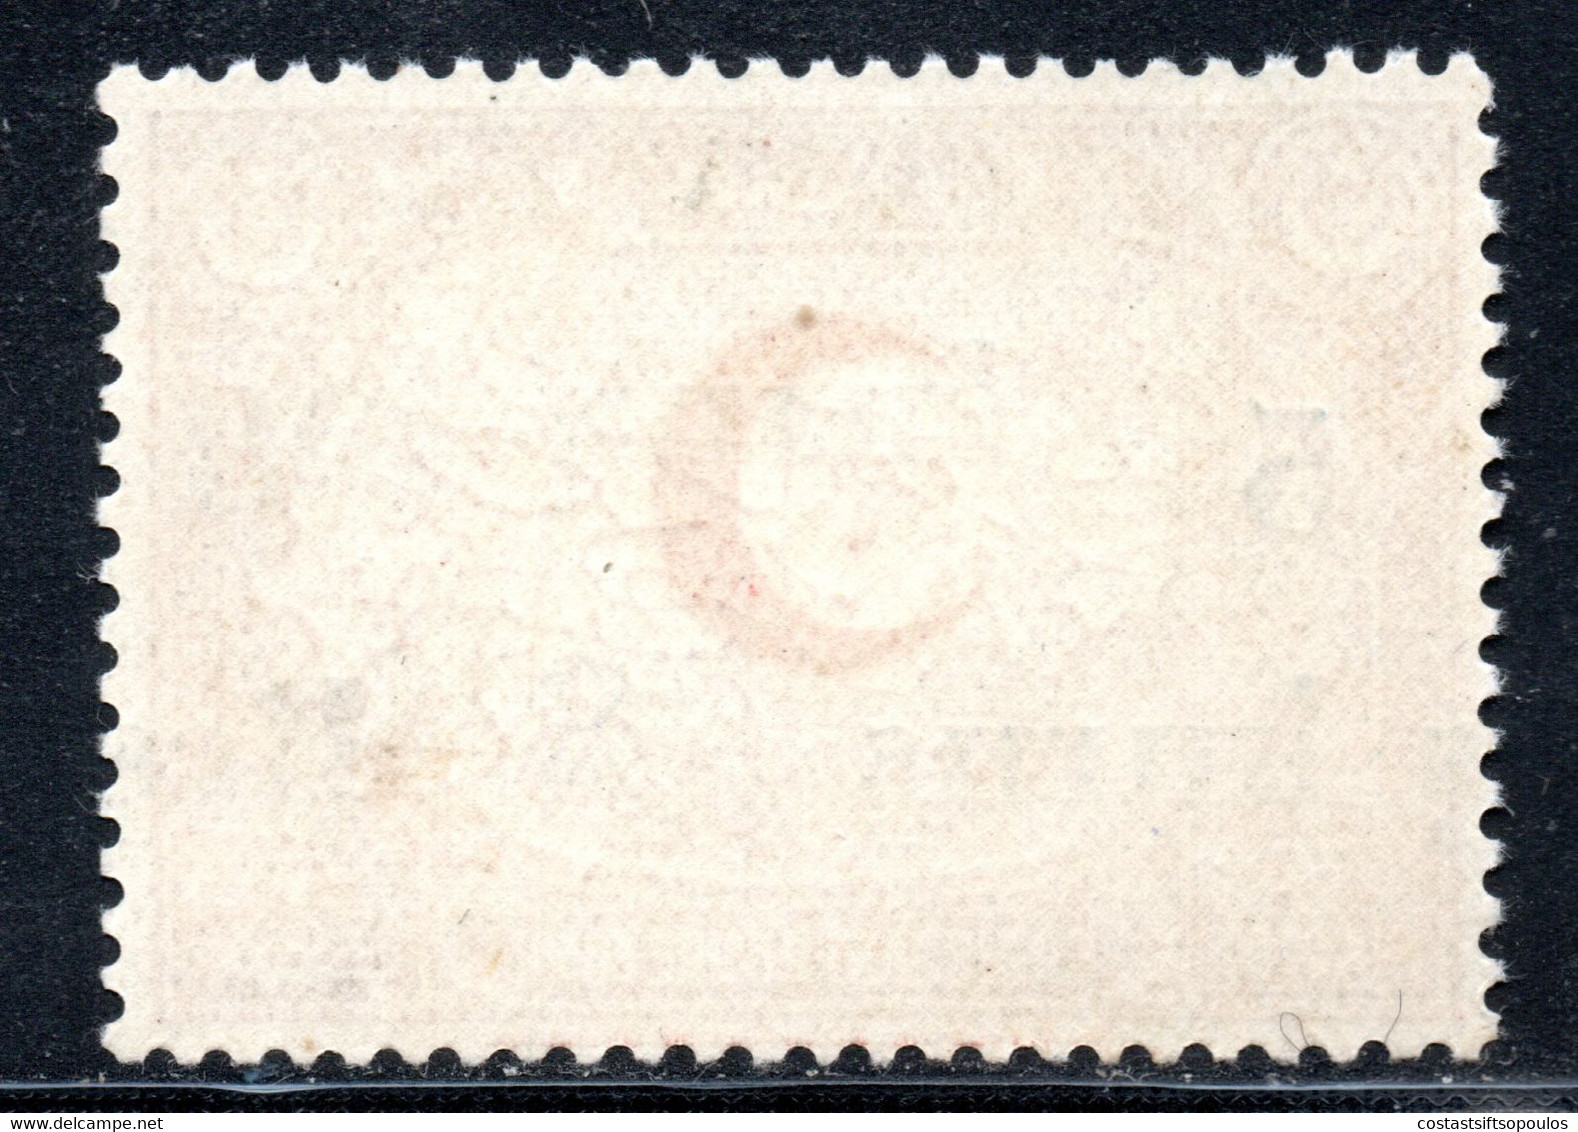 1012.TURKEY,1933-1934 RED CRESCENT,MAP MICH.25,SC.RA 22 DOUBLE SURCHARGE ONE INVERTED,MNH,UNRECORDED - Ongebruikt